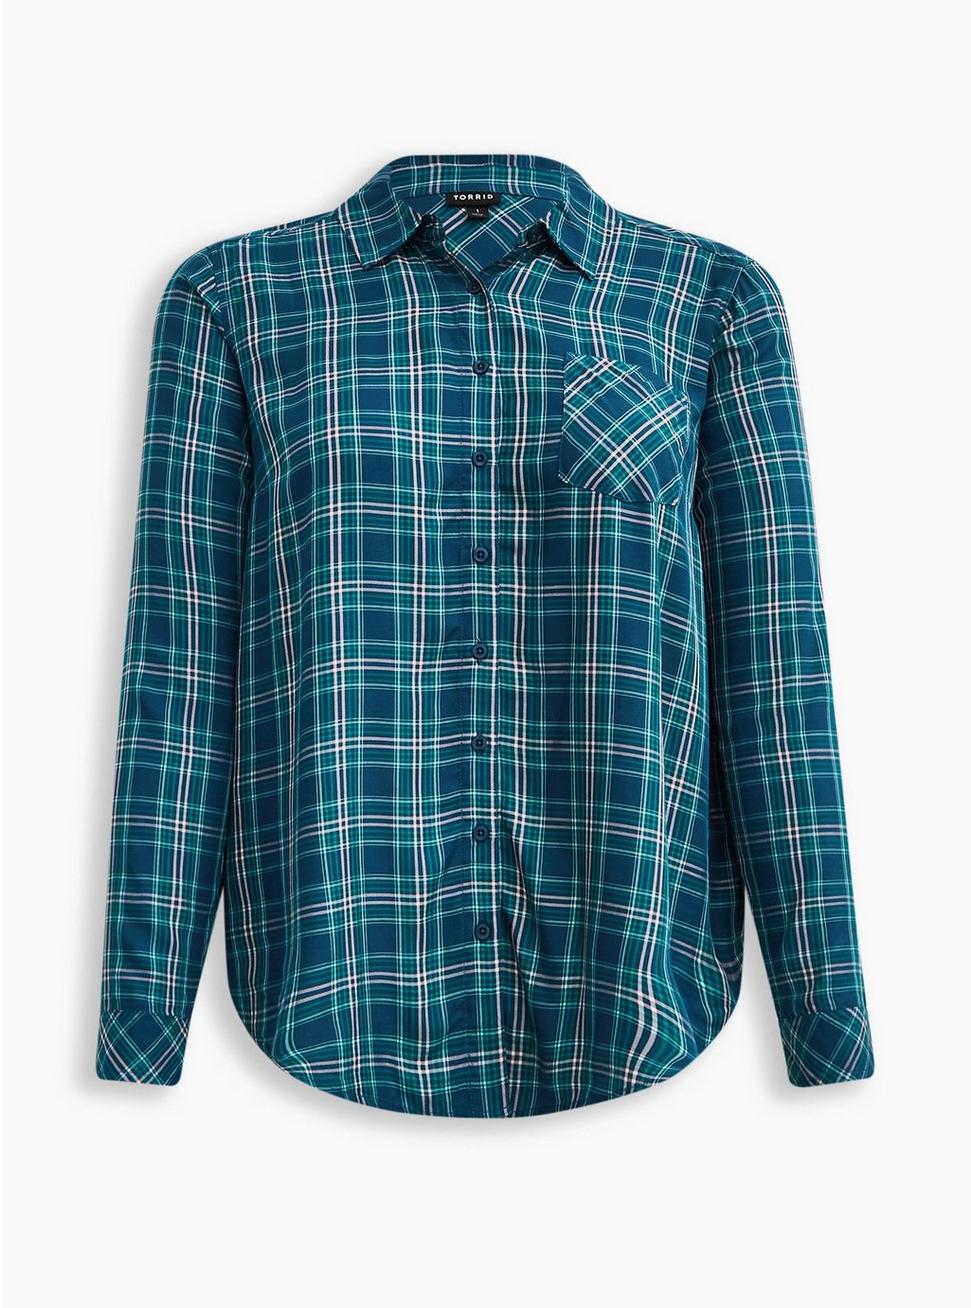 Lizzie Rayon Twill Button-Up Long Sleeve Shirt, PLAID TEAL, hi-res